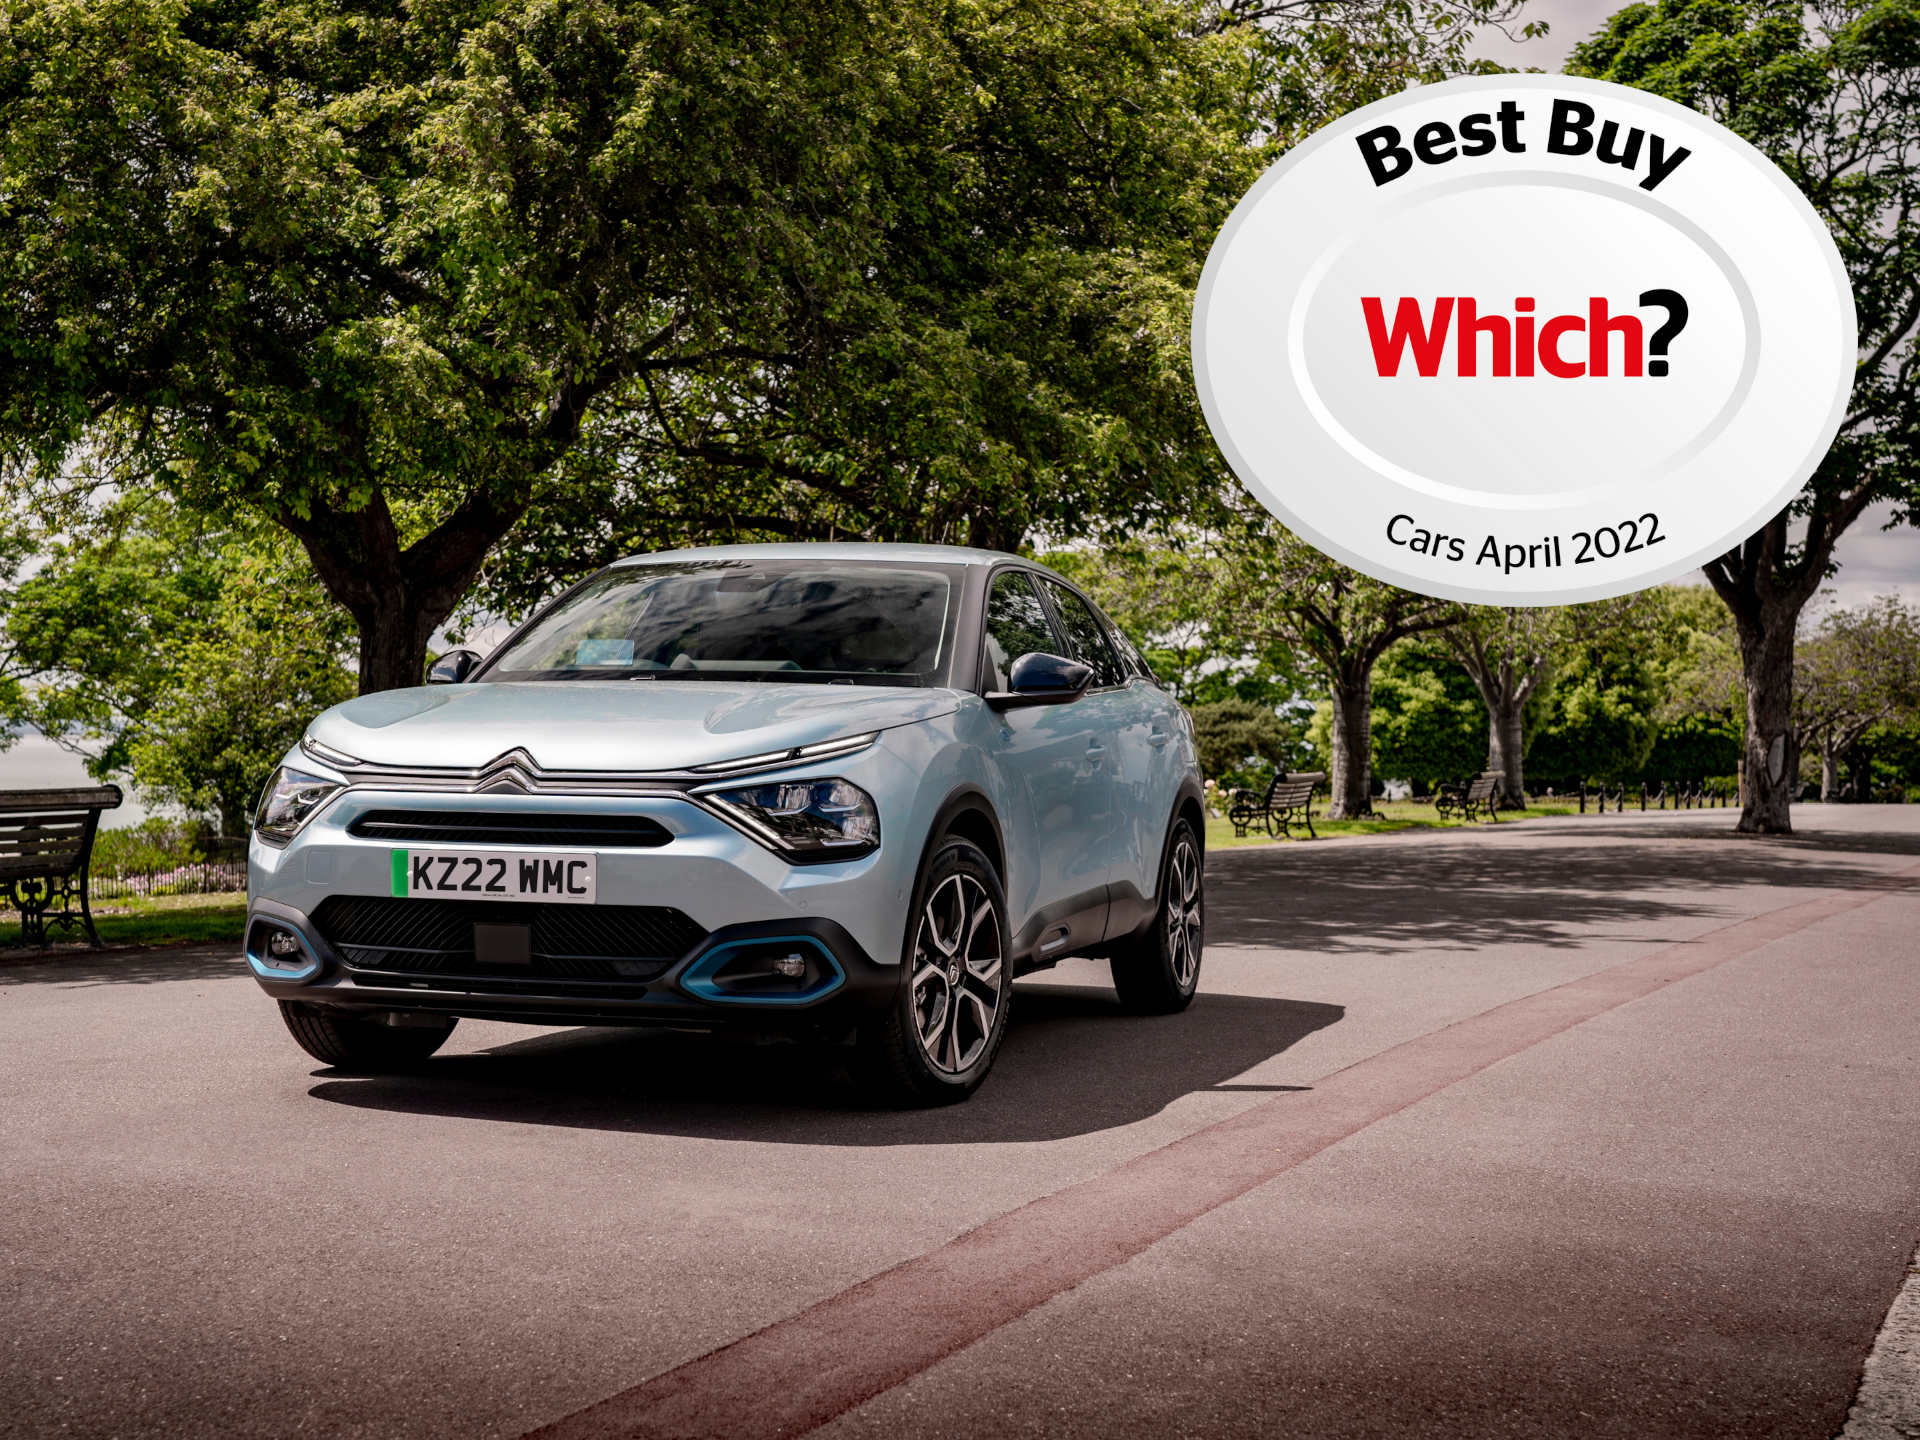 Which? ‘Best Buy’ Recommendation Awarded To Citroën ë-C4 Electric